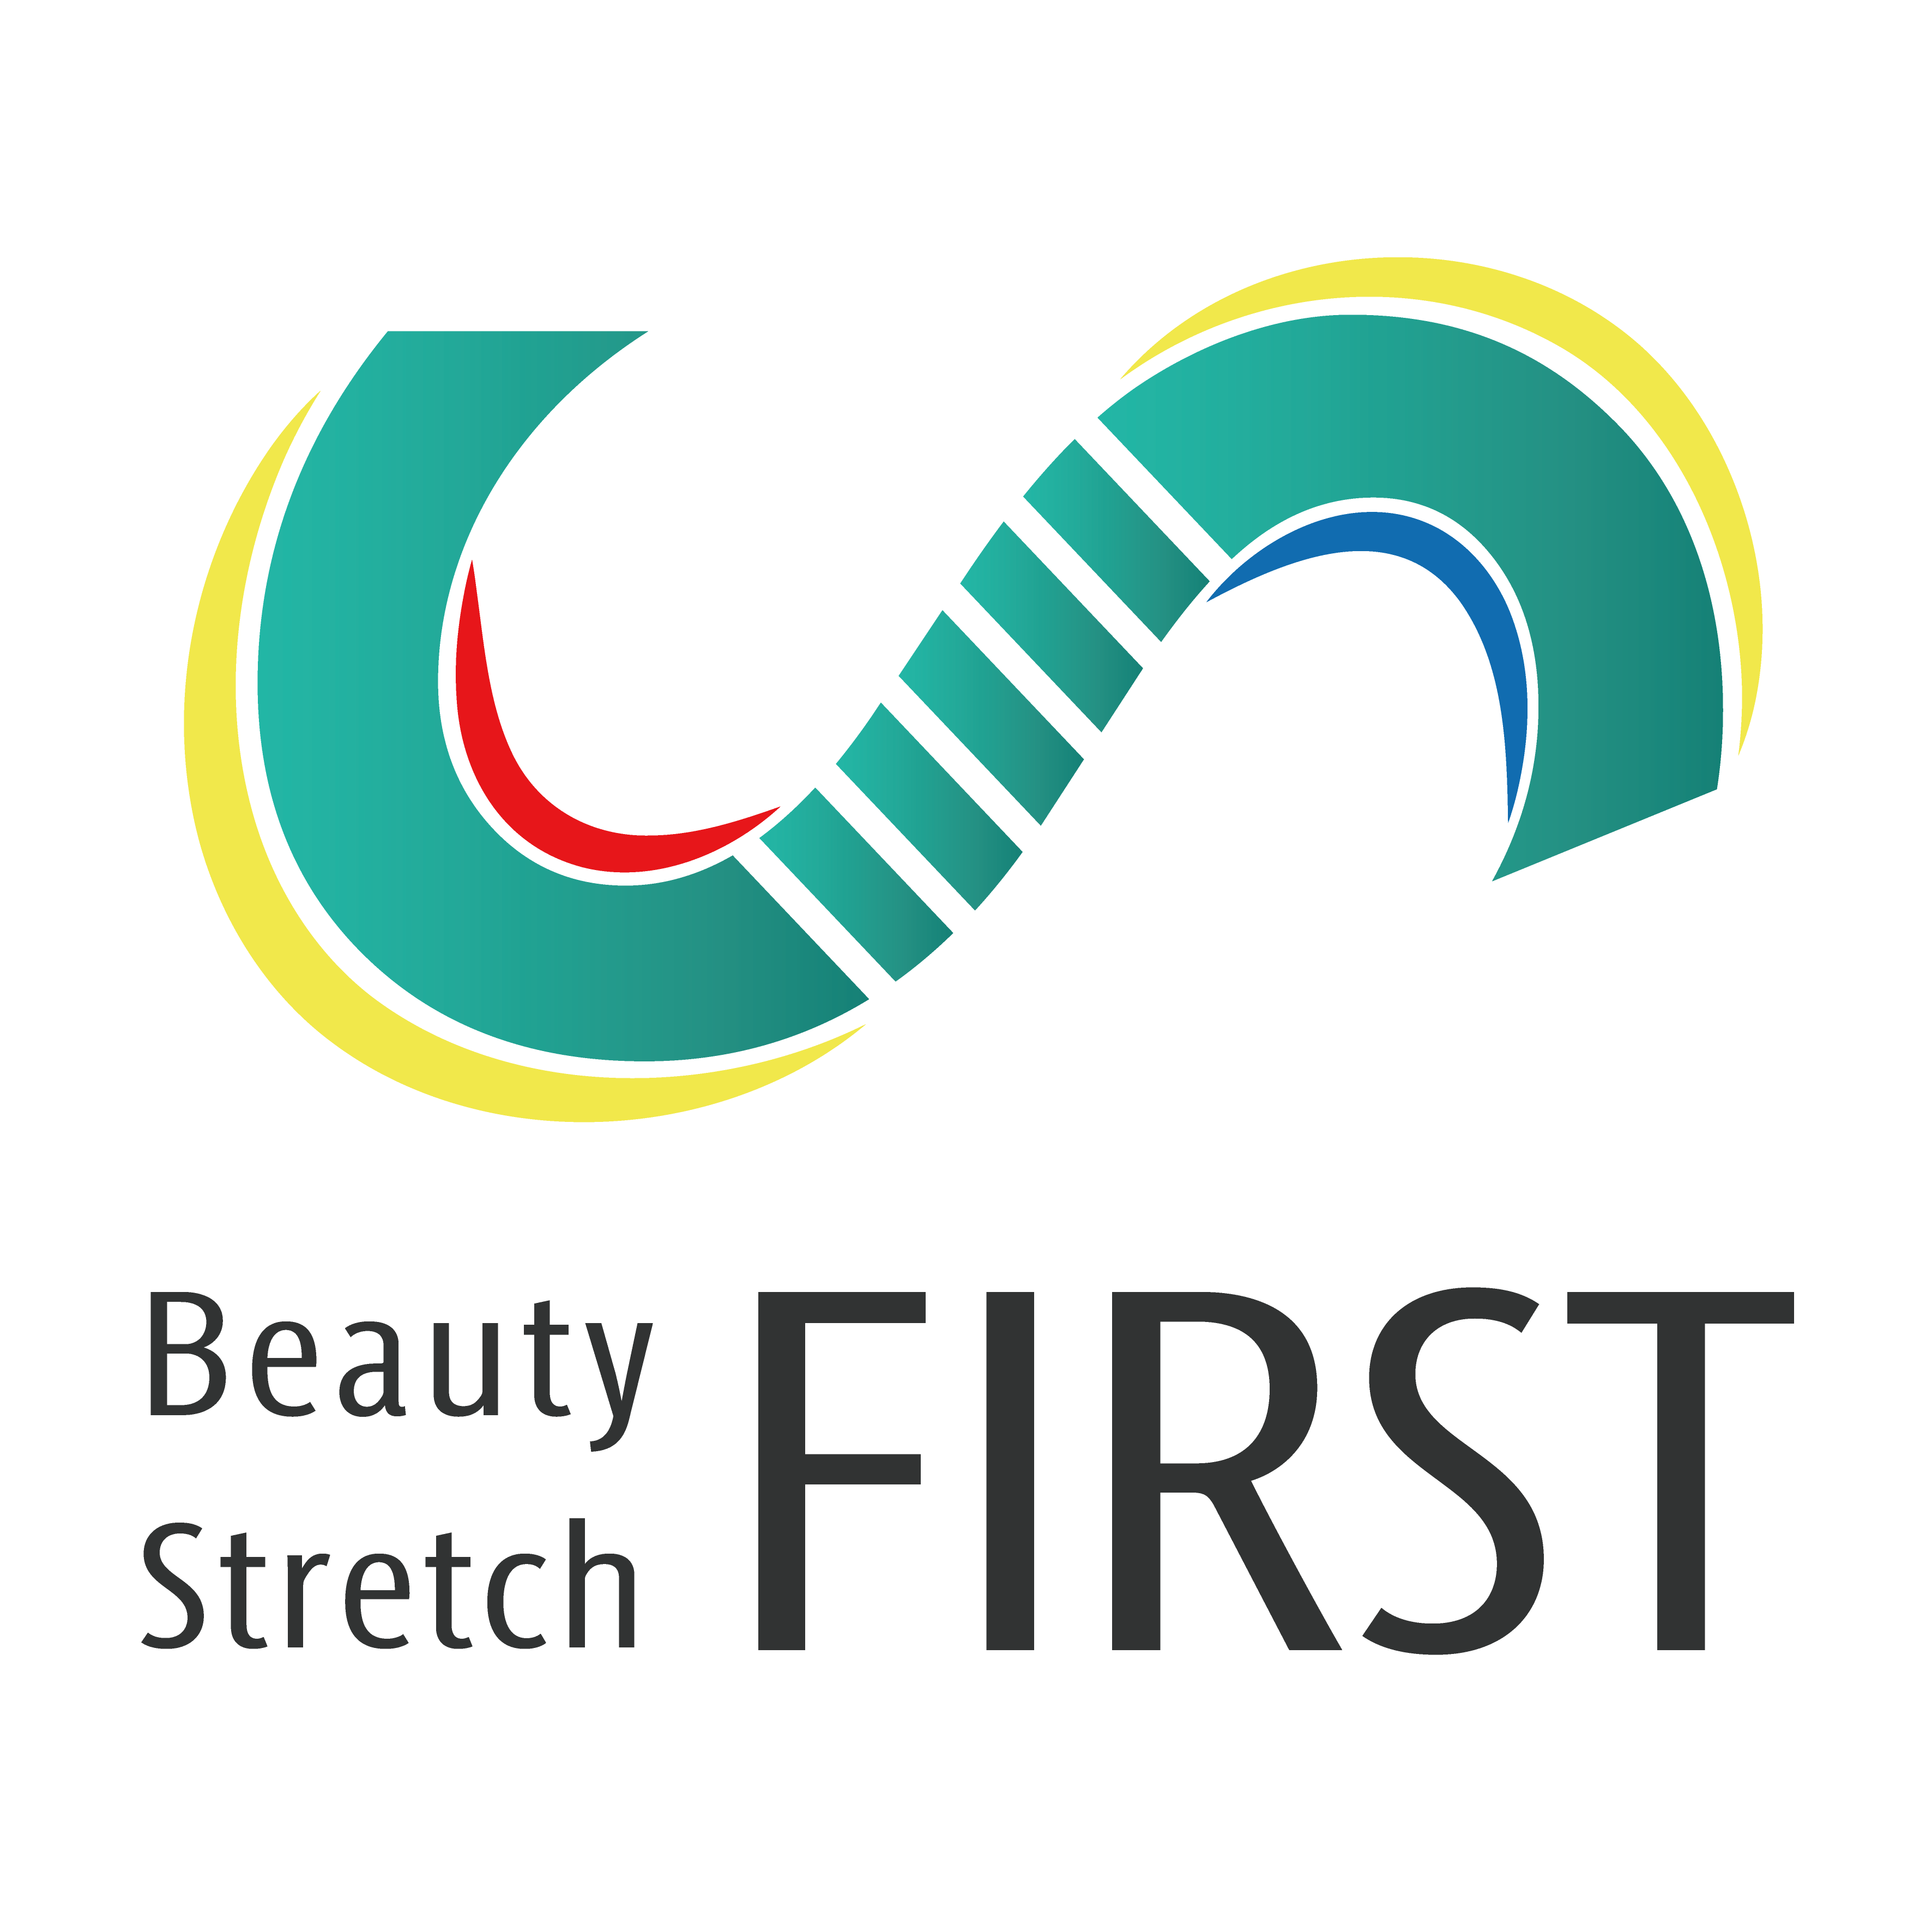 Beauty Stretch FIRST